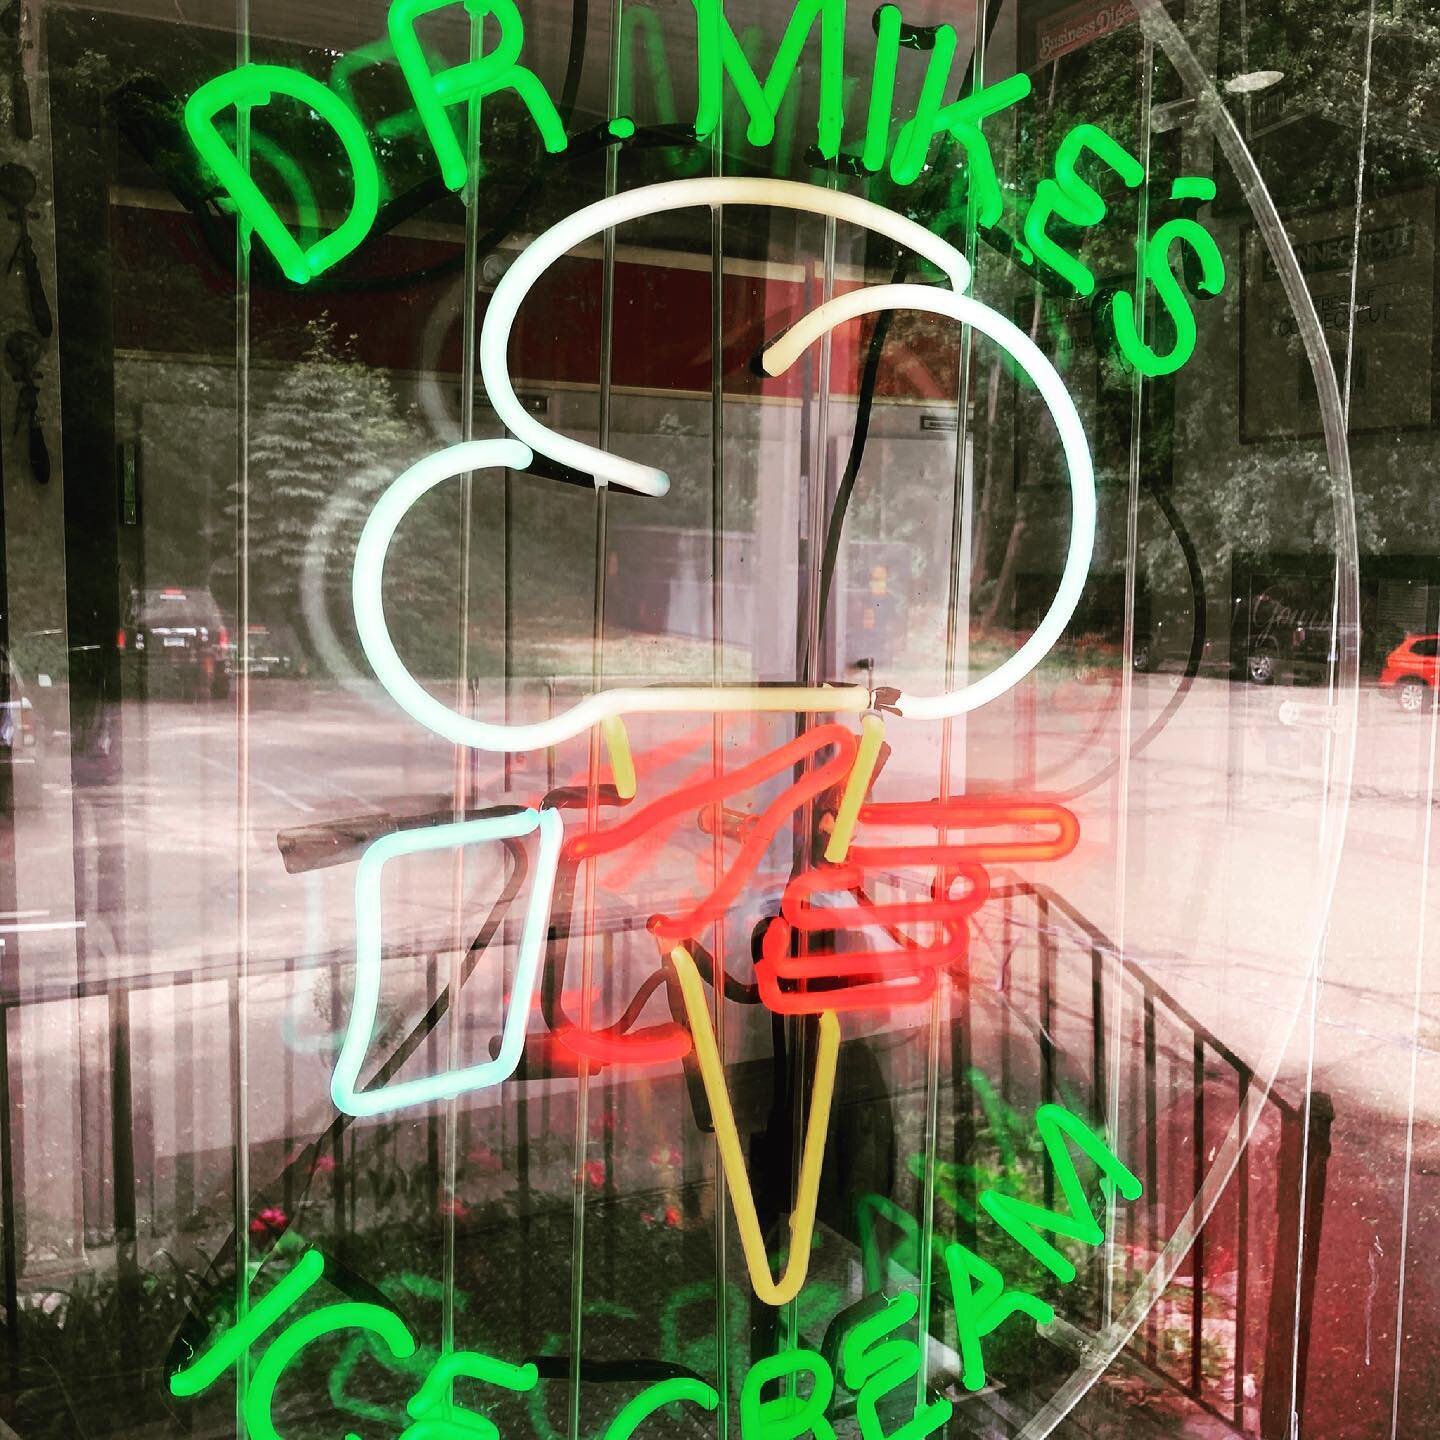 EXCITING NEWS!! DR. MIKE&rsquo;S WILL BE CLOSED TODAY DUE TO RENOVATIONS 🛠 WE ARE INSTALLING NEW FREEZERS AND A TAKE OUT WINDOW😁STAY TUNED FOR UPDATES BUT HOPING TO REOPEN TOMORROW. #renovationproject #renovation #walkupwindowservice #takeoutfood #